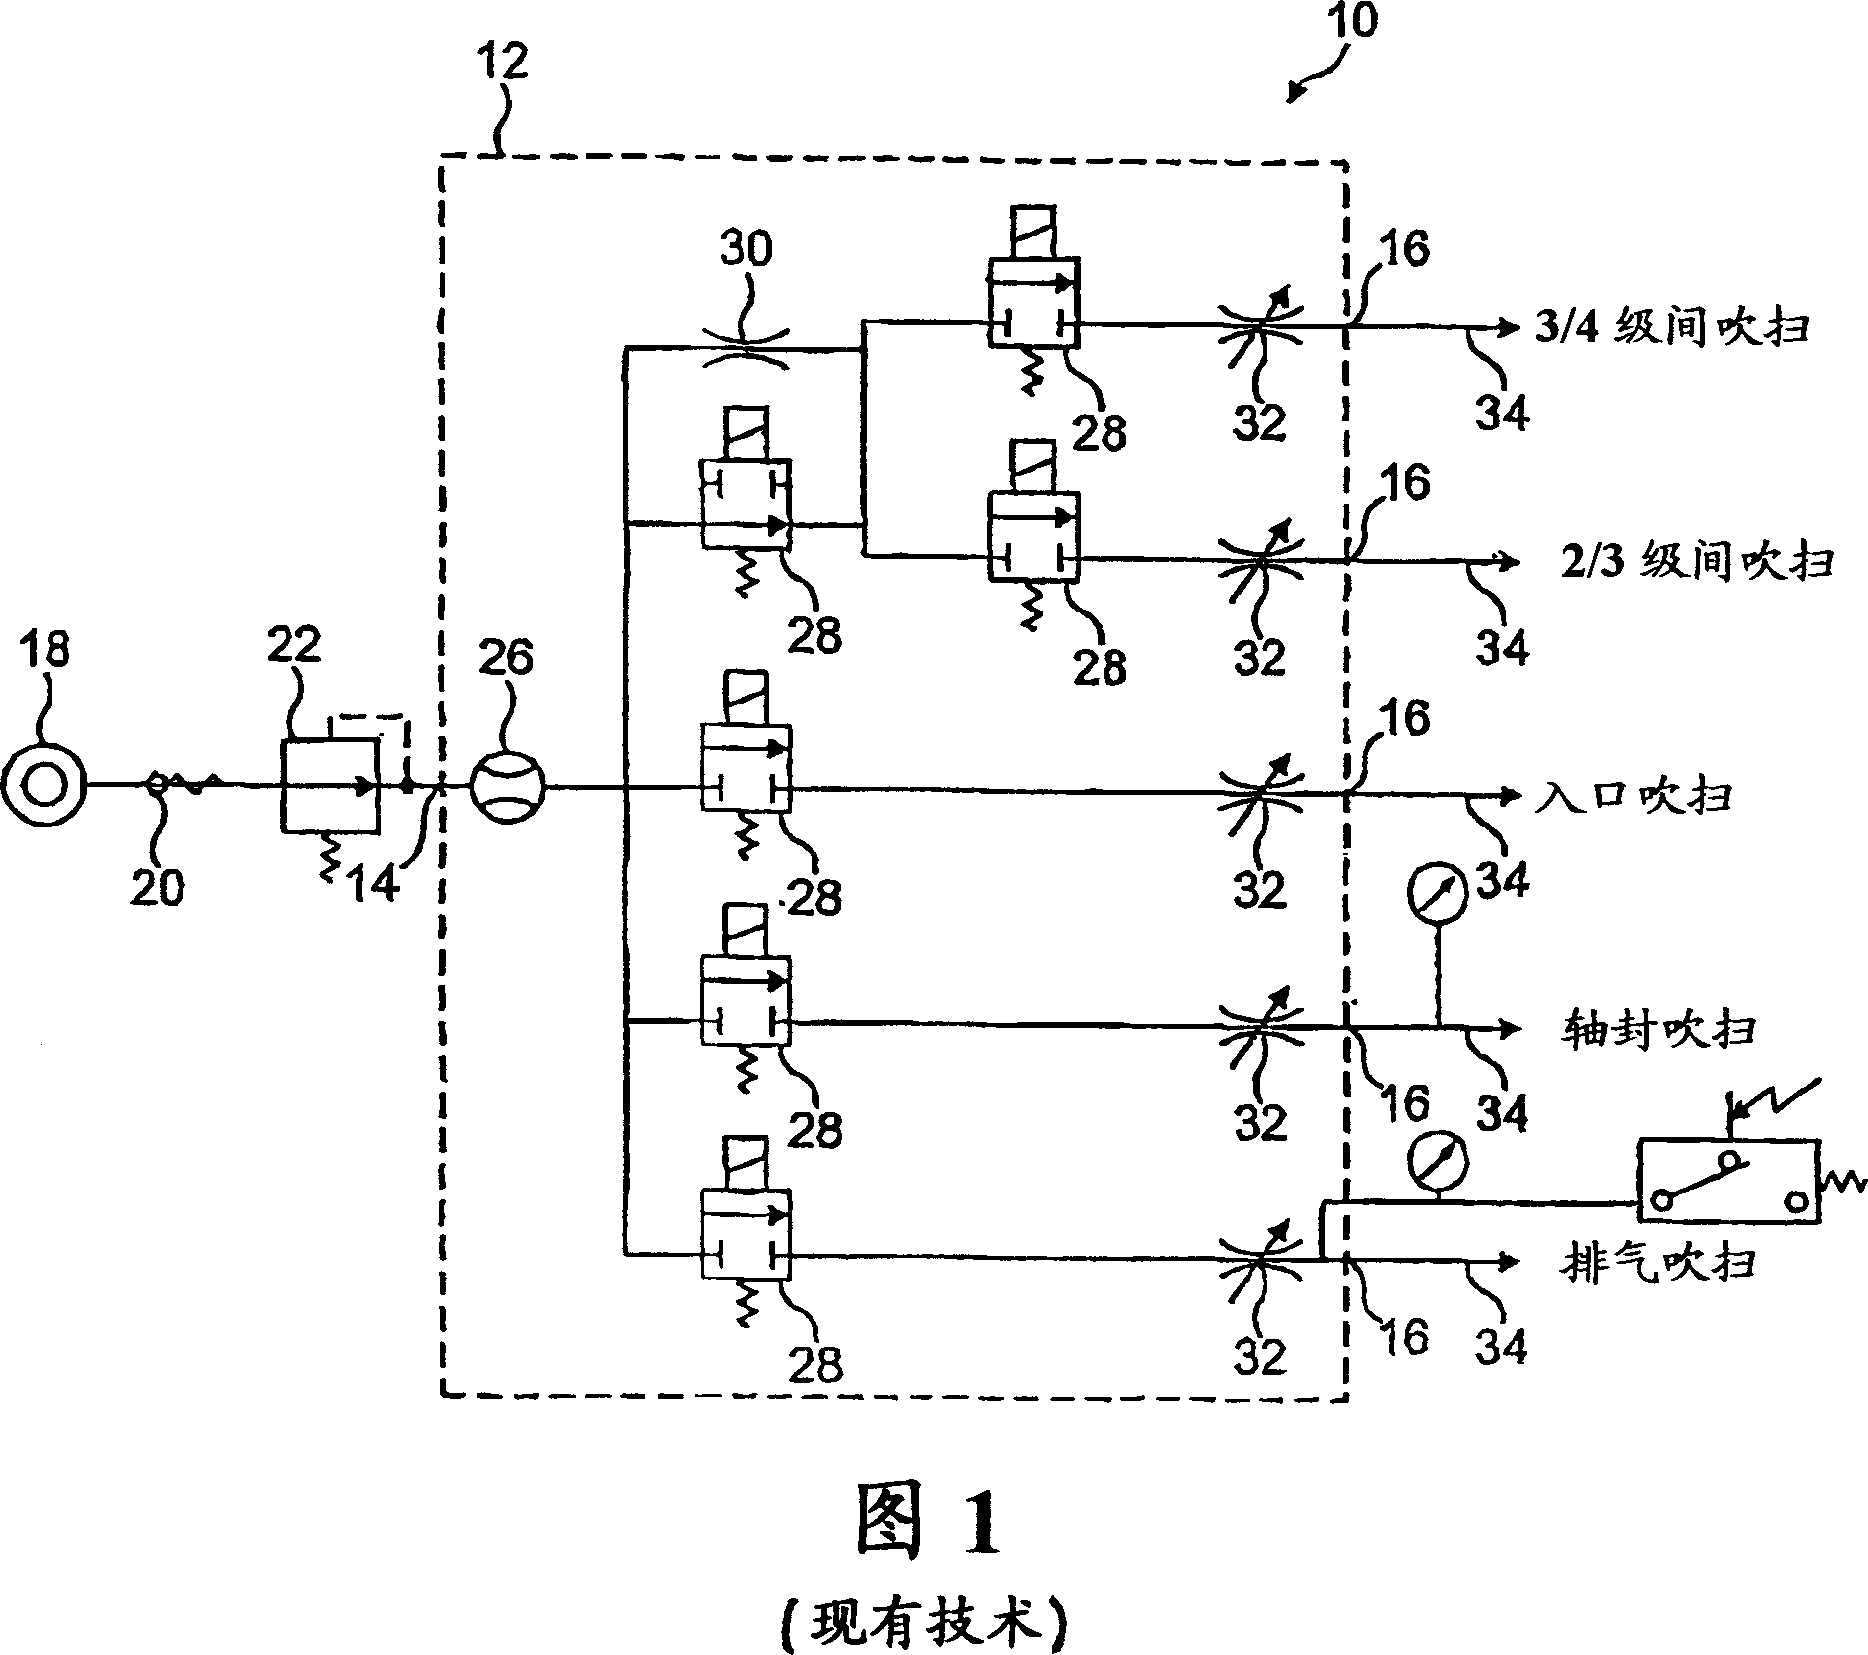 Gas supply system for a pumping arrangement